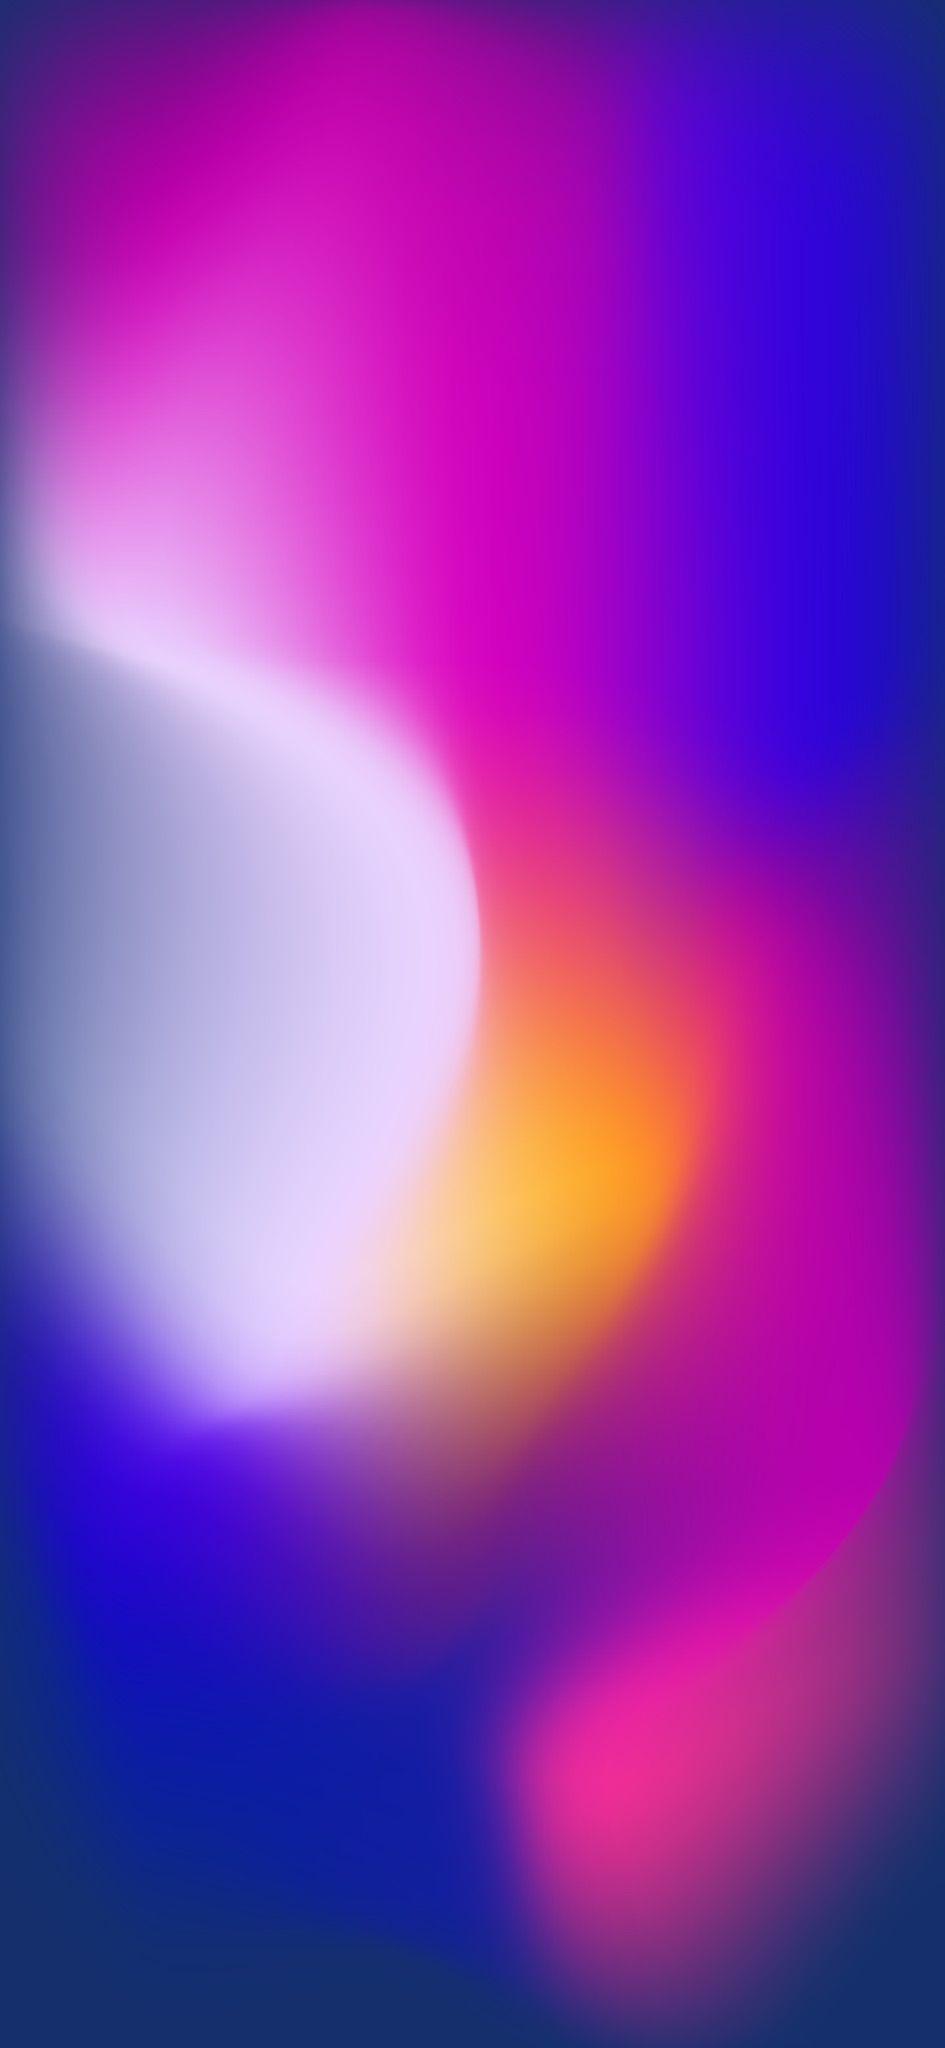 colors.a blur of colors. Mobile wallpaper, Android wallpaper, iPhone wallpaper